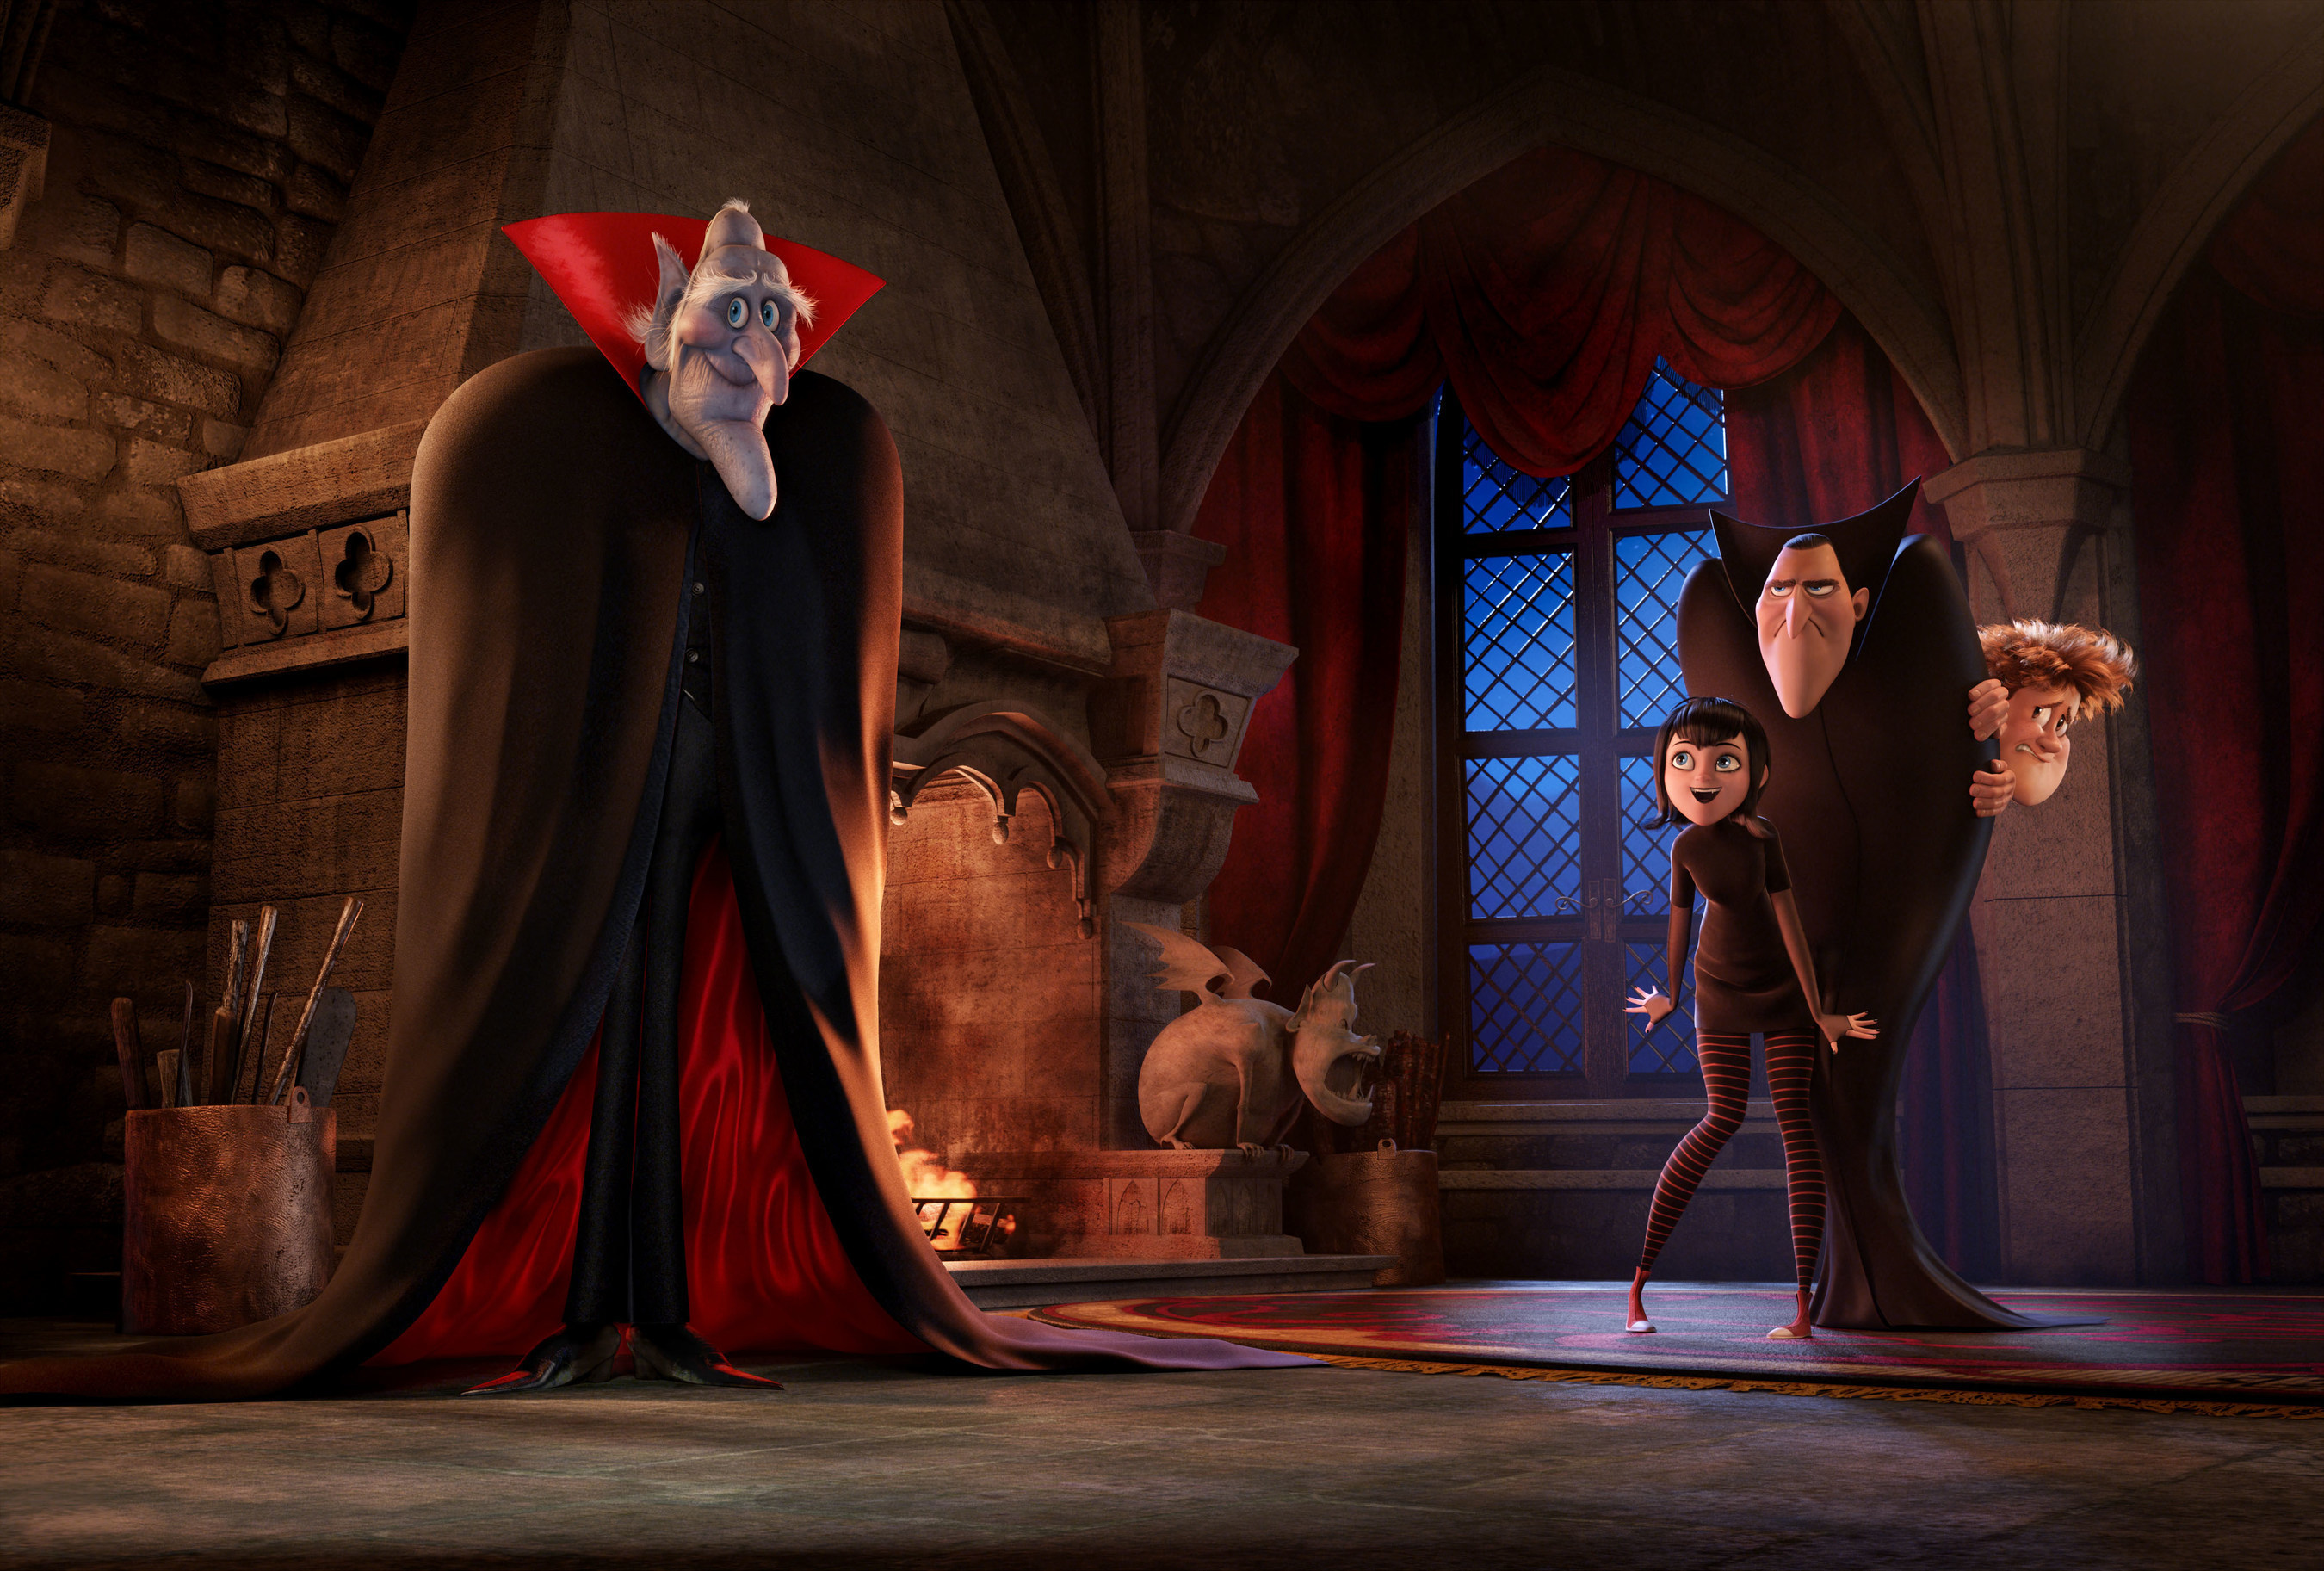 The ancient, undead and incredibly grumpy vampire Vlad (voiced by Mel Brooks) pays an impromptu visit to his son Dracula (Adam Sandler), granddaughter Mavis (Selena Gomez) and her boyfriend Johnny (Andy Samberg) in Sony Pictures Animation's HOTEL TRANSYLVANIA 2, in theaters September 2015.